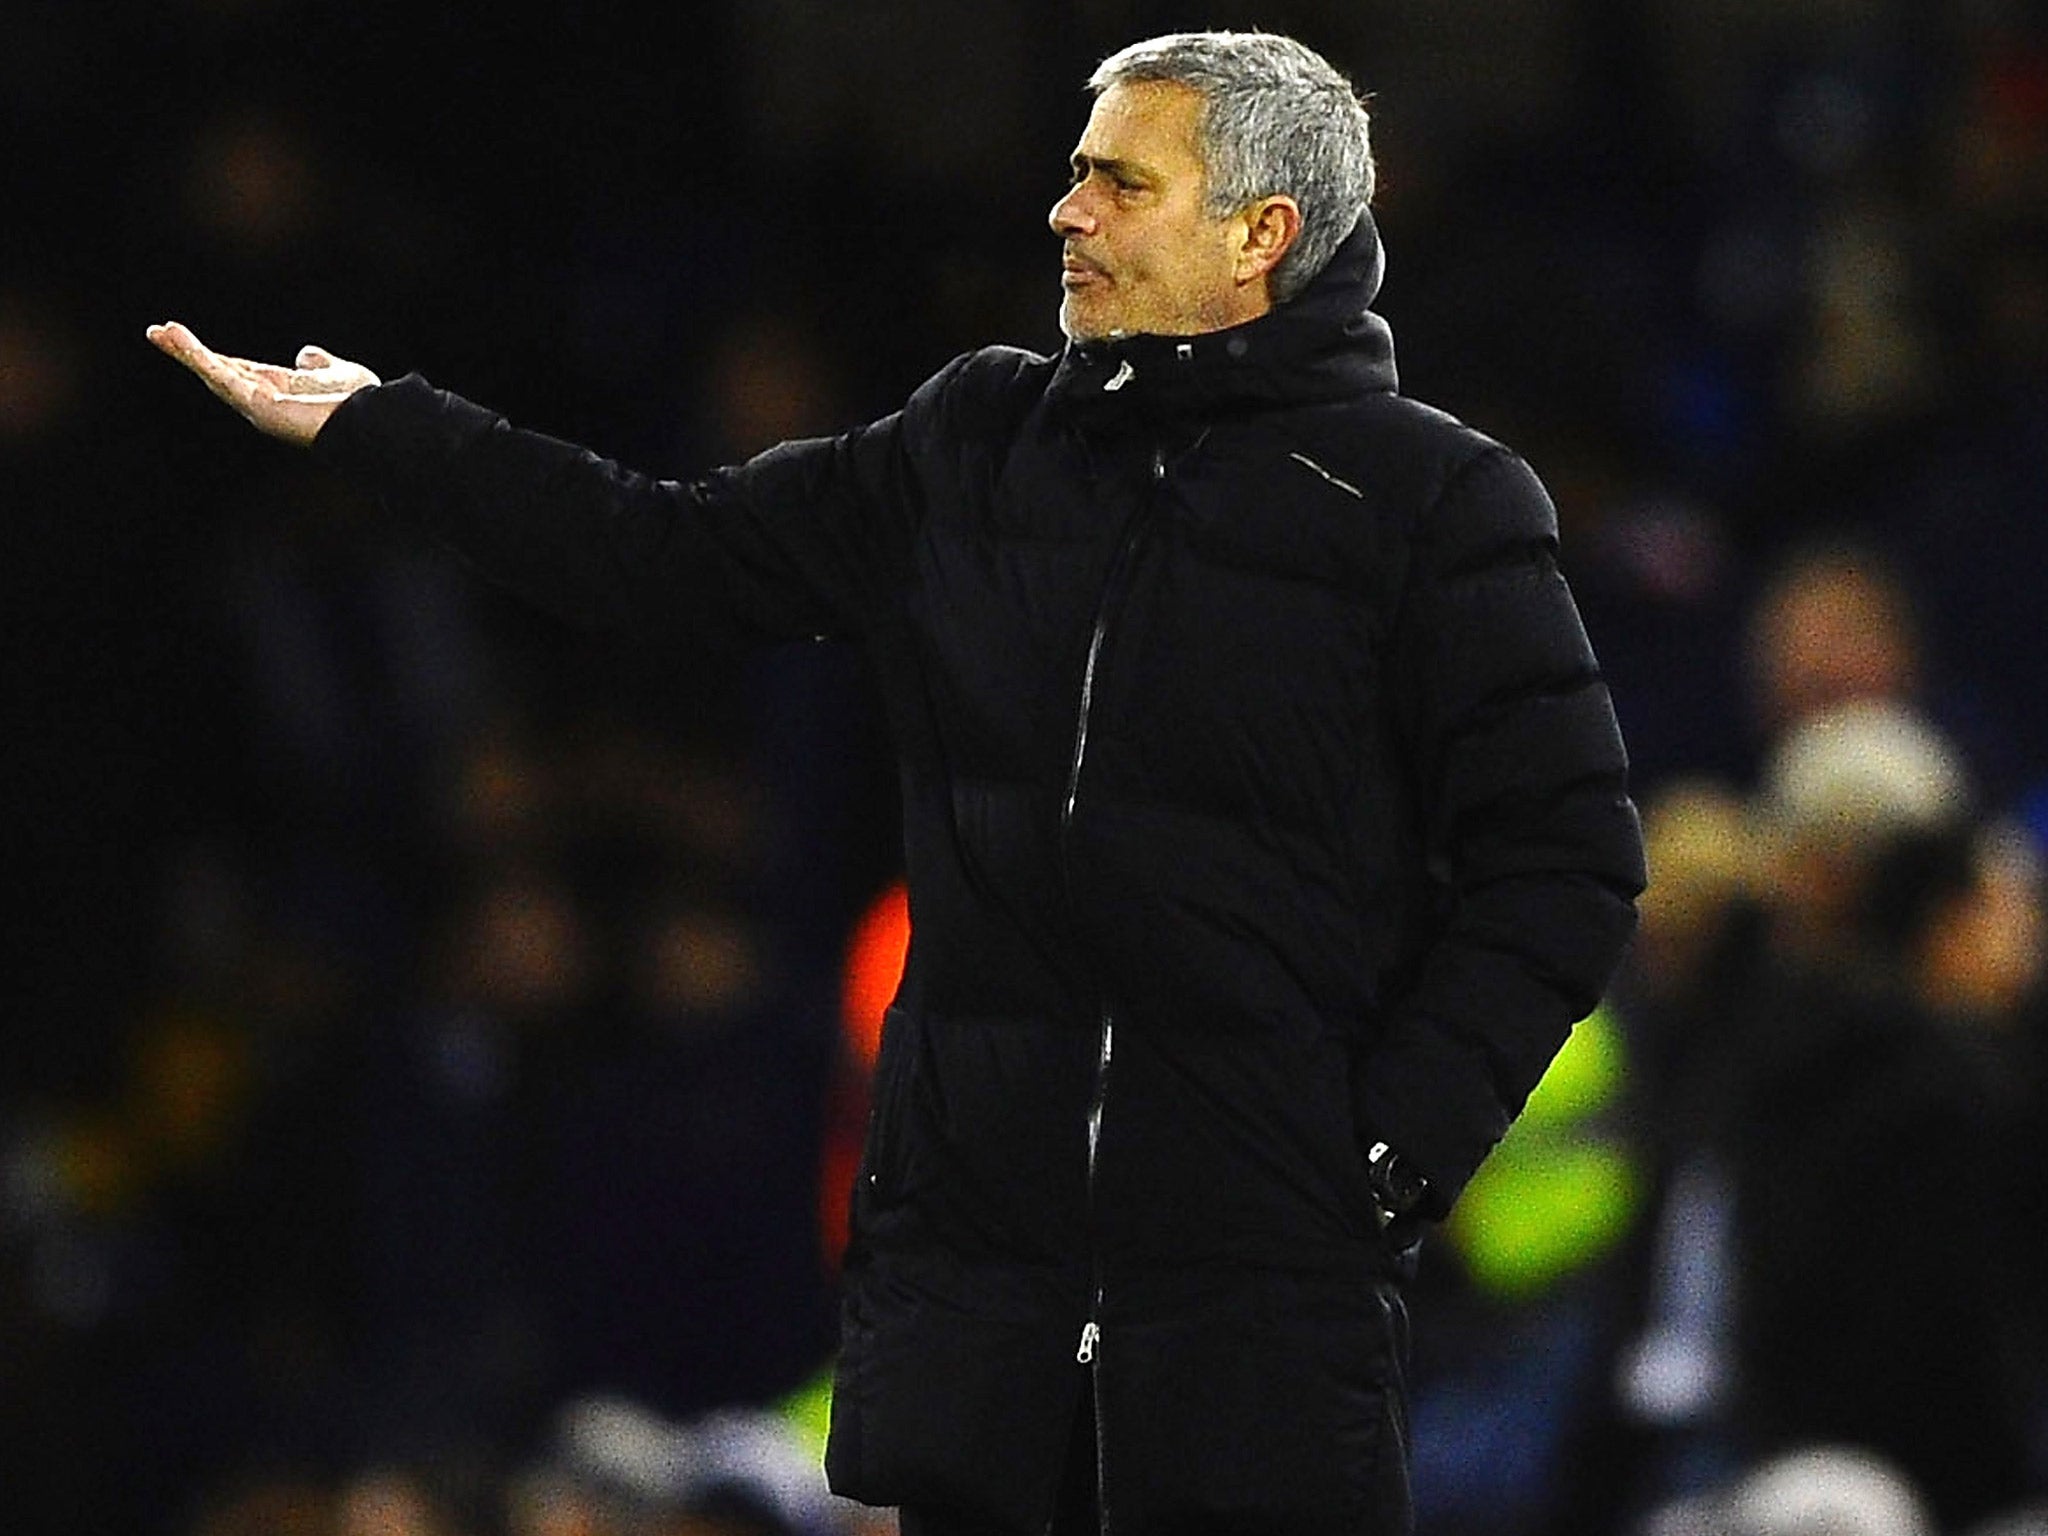 Jose Mourinho gestures from the sideline